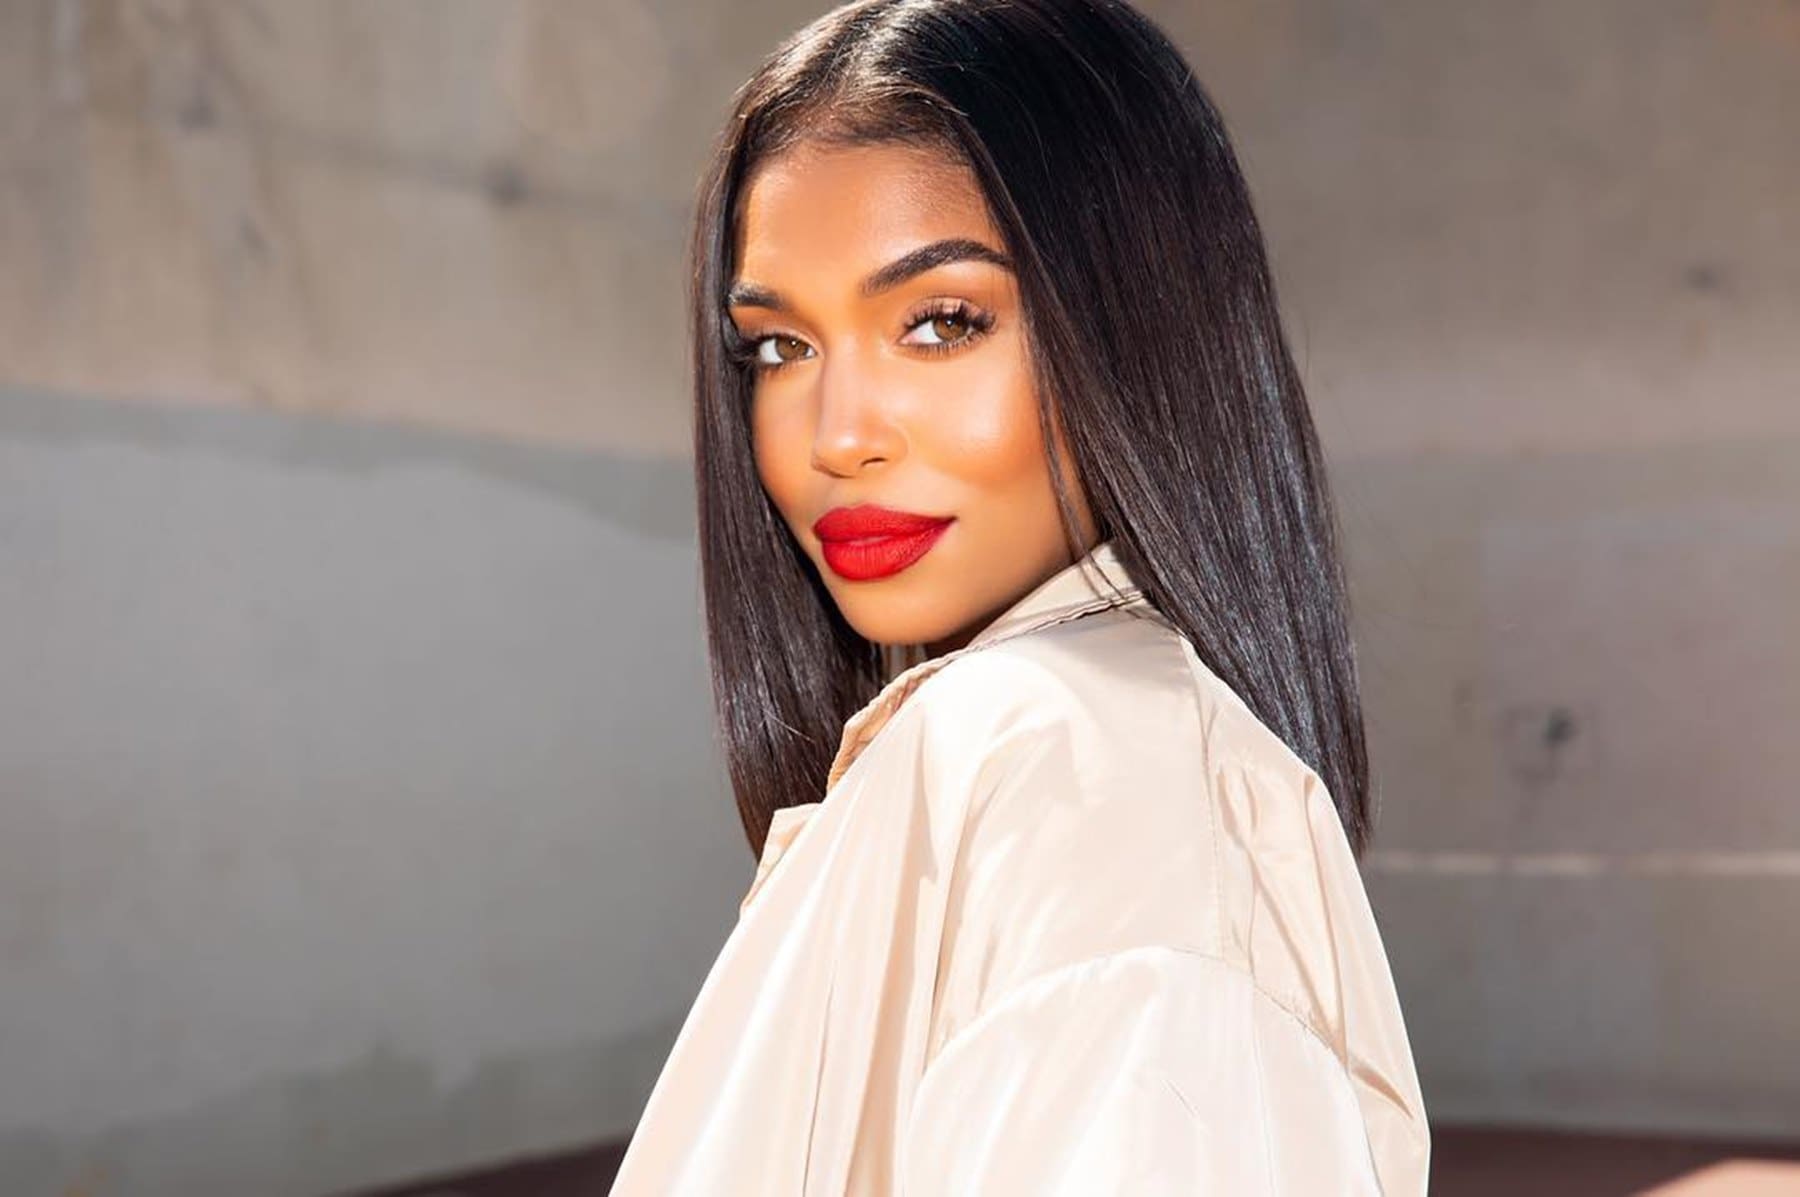 Future’s Girlfriend, Lori Harvey, Wears Over The Top Gown To Go